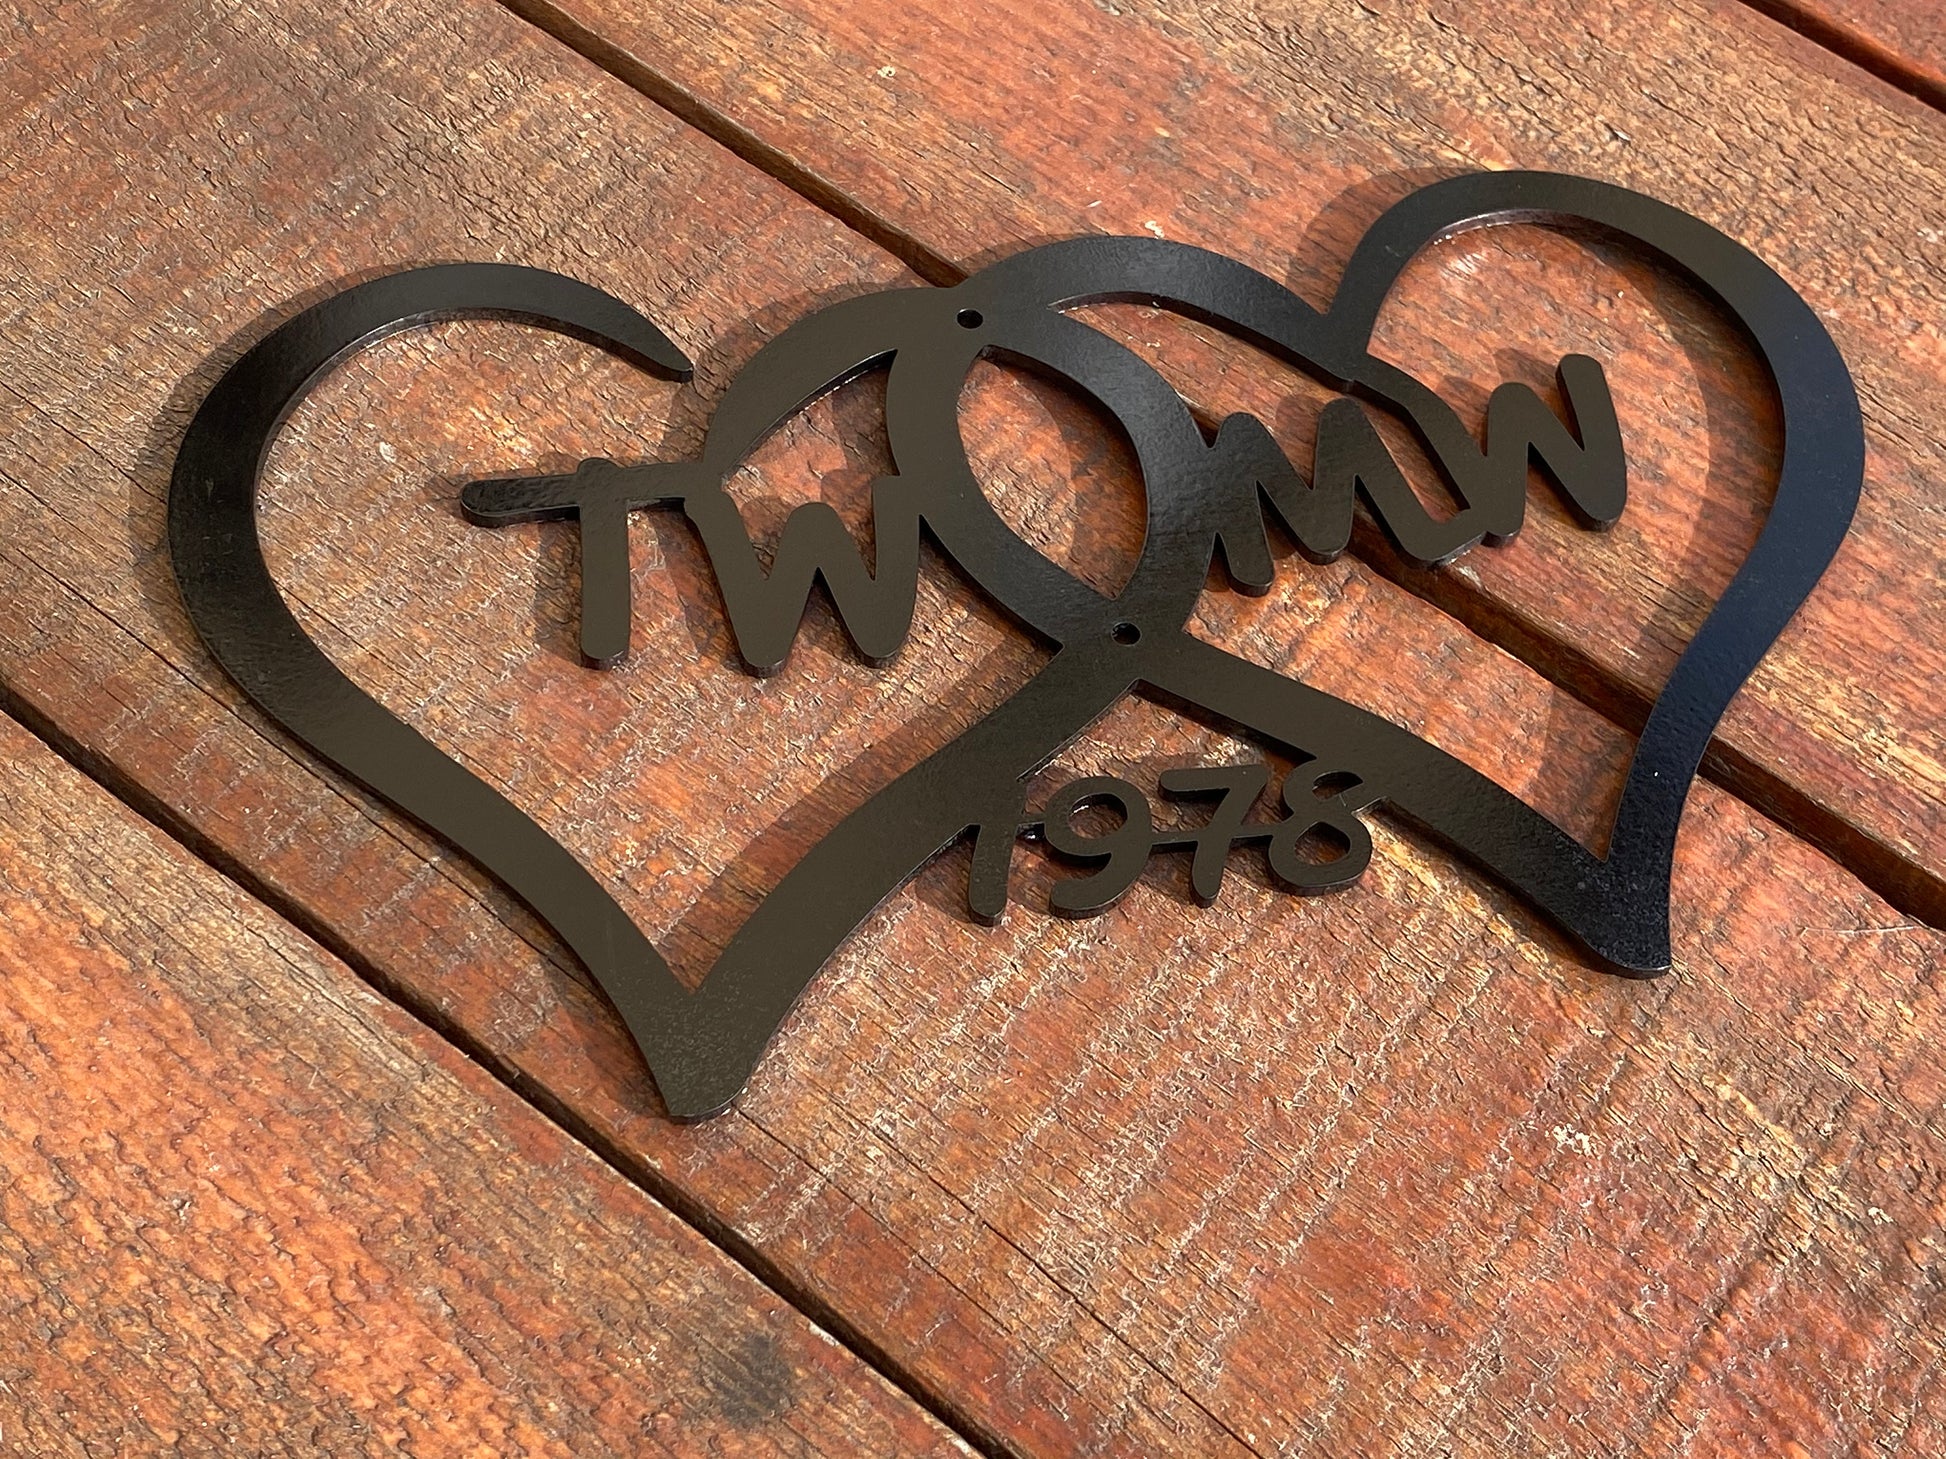 Personalized gift, 6th anniversary, iron gift, entwined hearts, iron heart, iron rose,heart,anniversary, engraved iron gift,iron anniversary